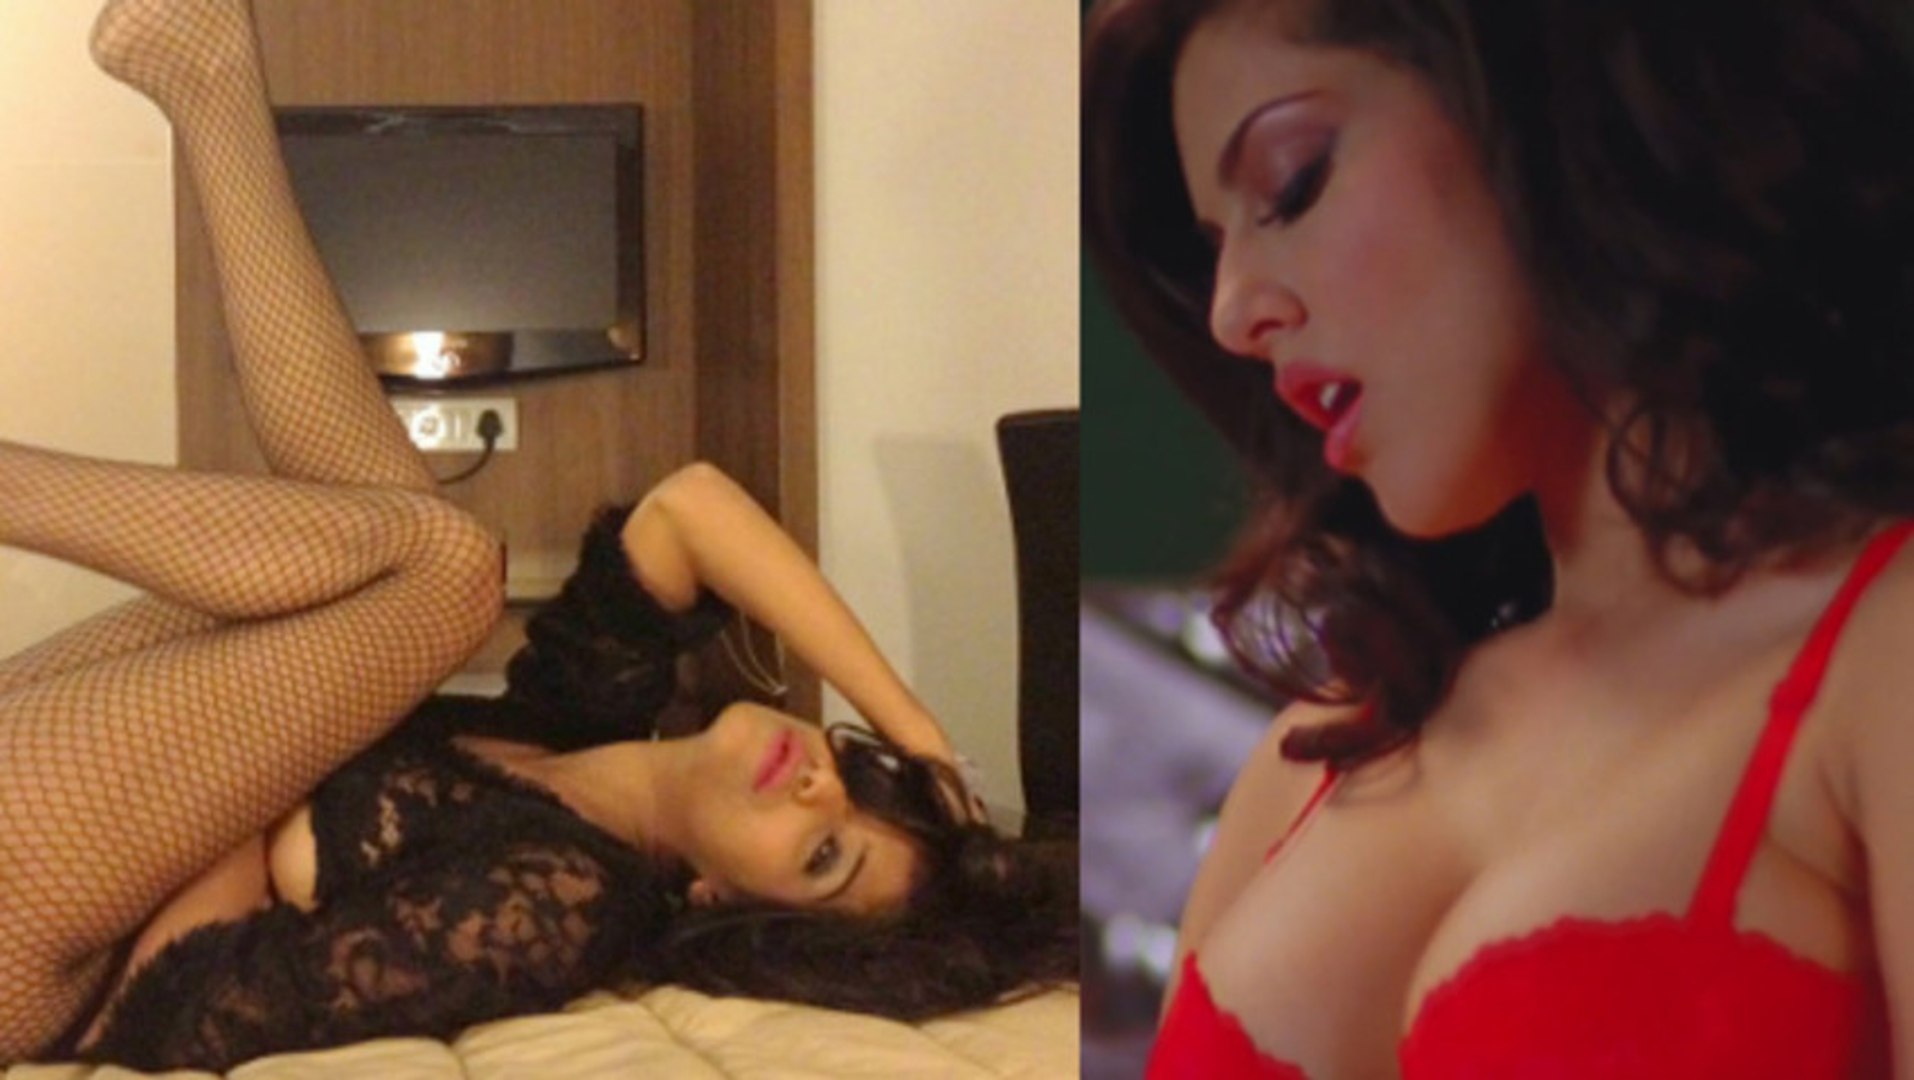 Sunny Leone Daily Motion Pictures Video - Poonam Pandey Copies Sunny Leone's Sex Postures - video Dailymotion